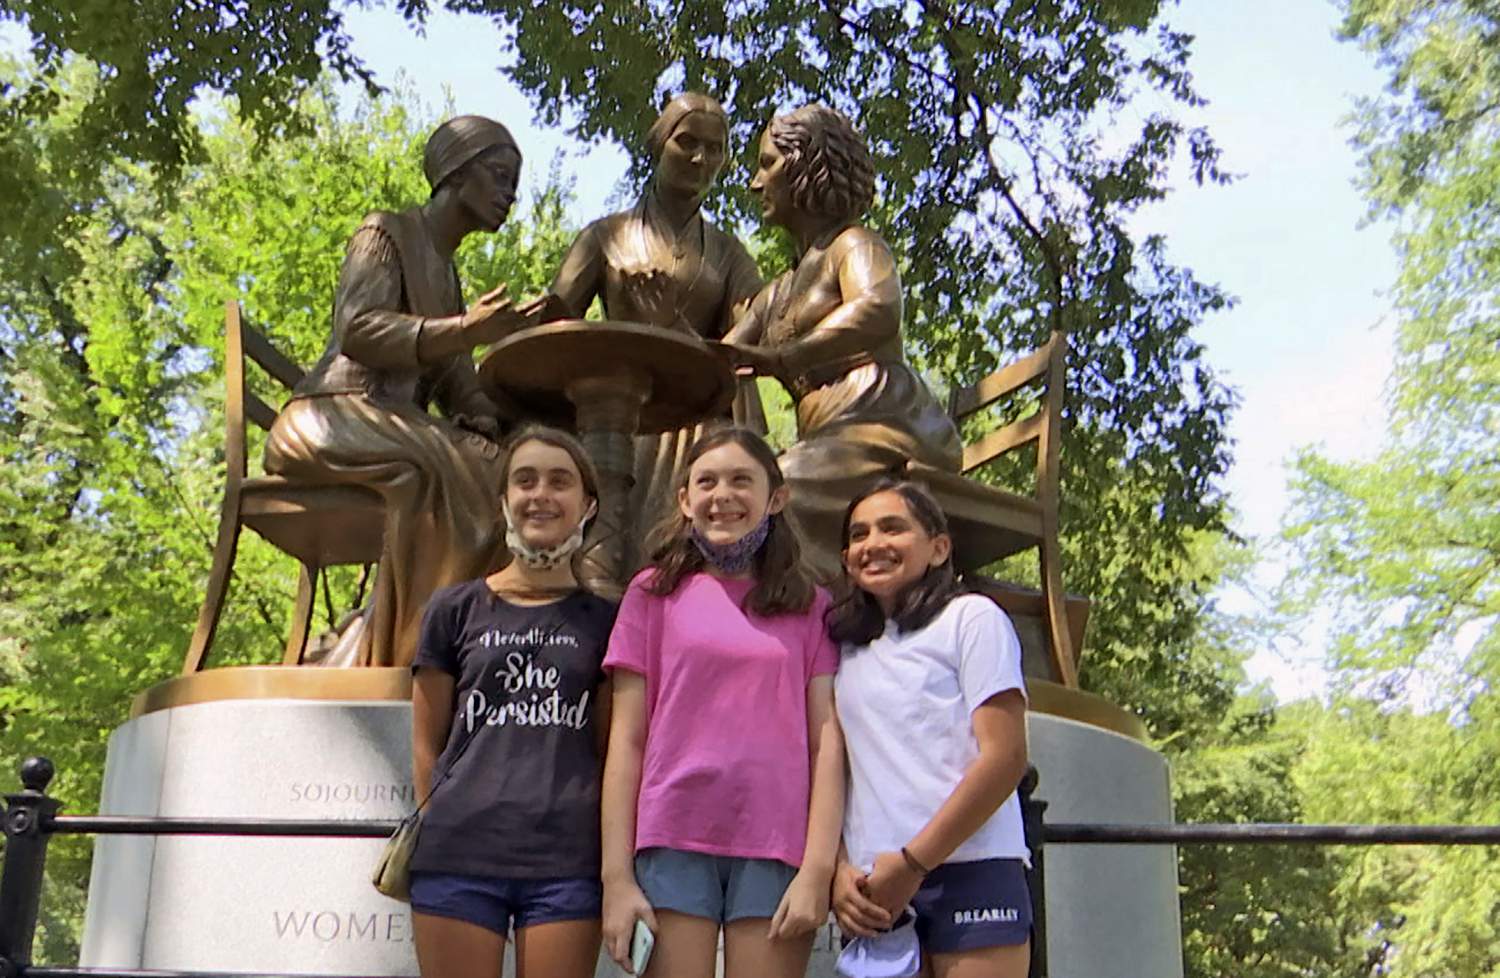 Central Park monument honors women's rights pioneers